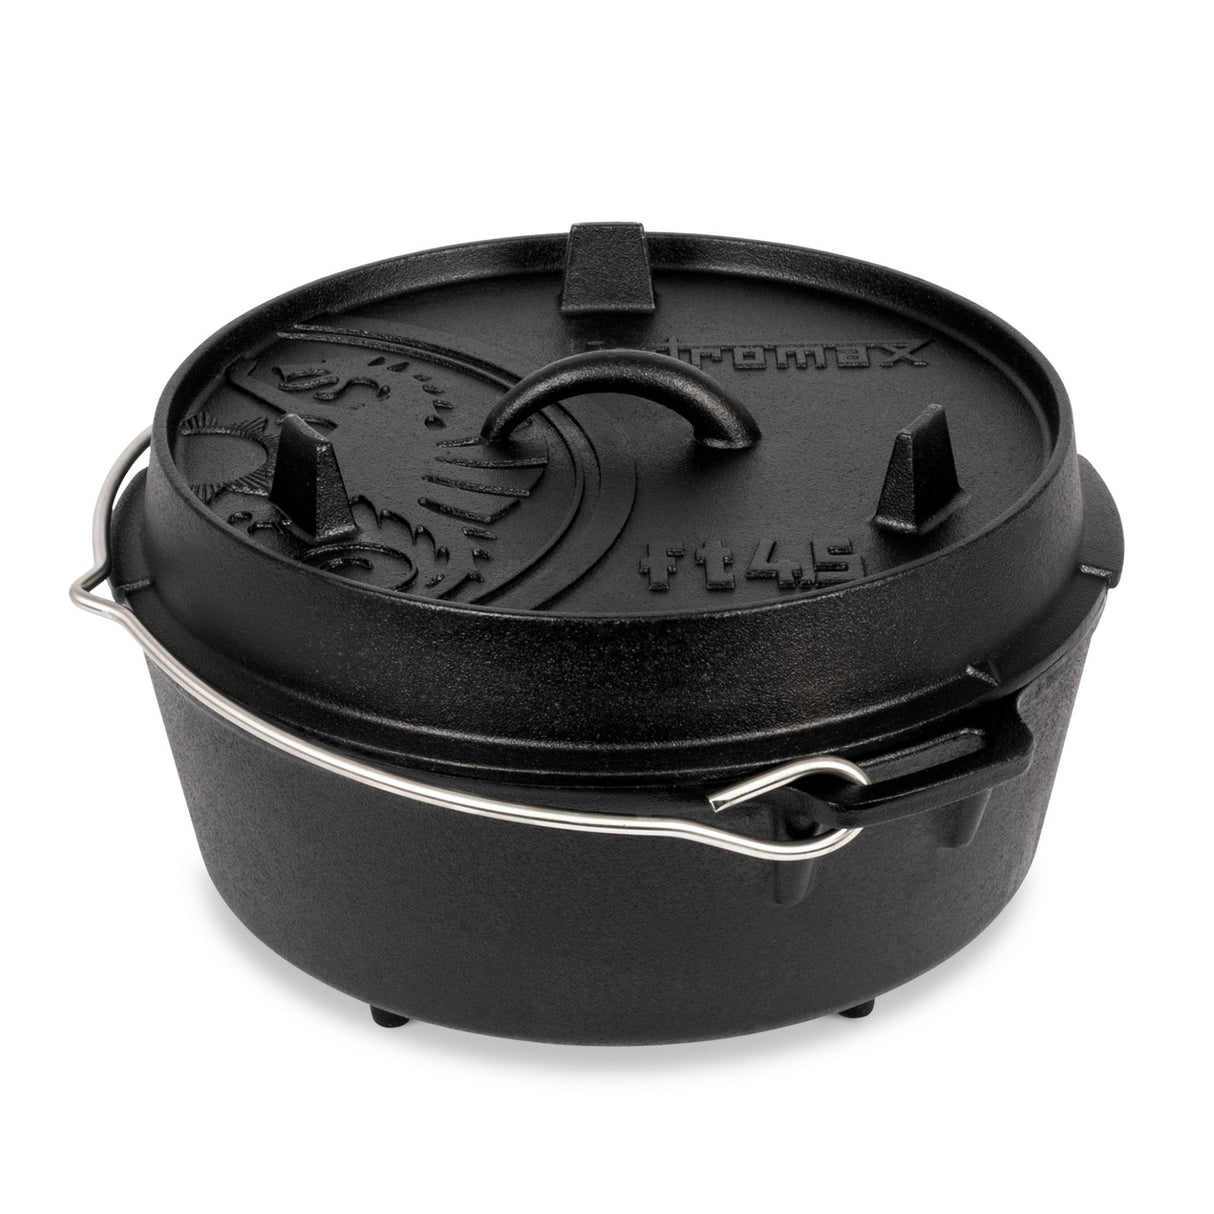 Petromax - Dutch Oven FT4.5 PM_FT4.5 - Brave Hardy